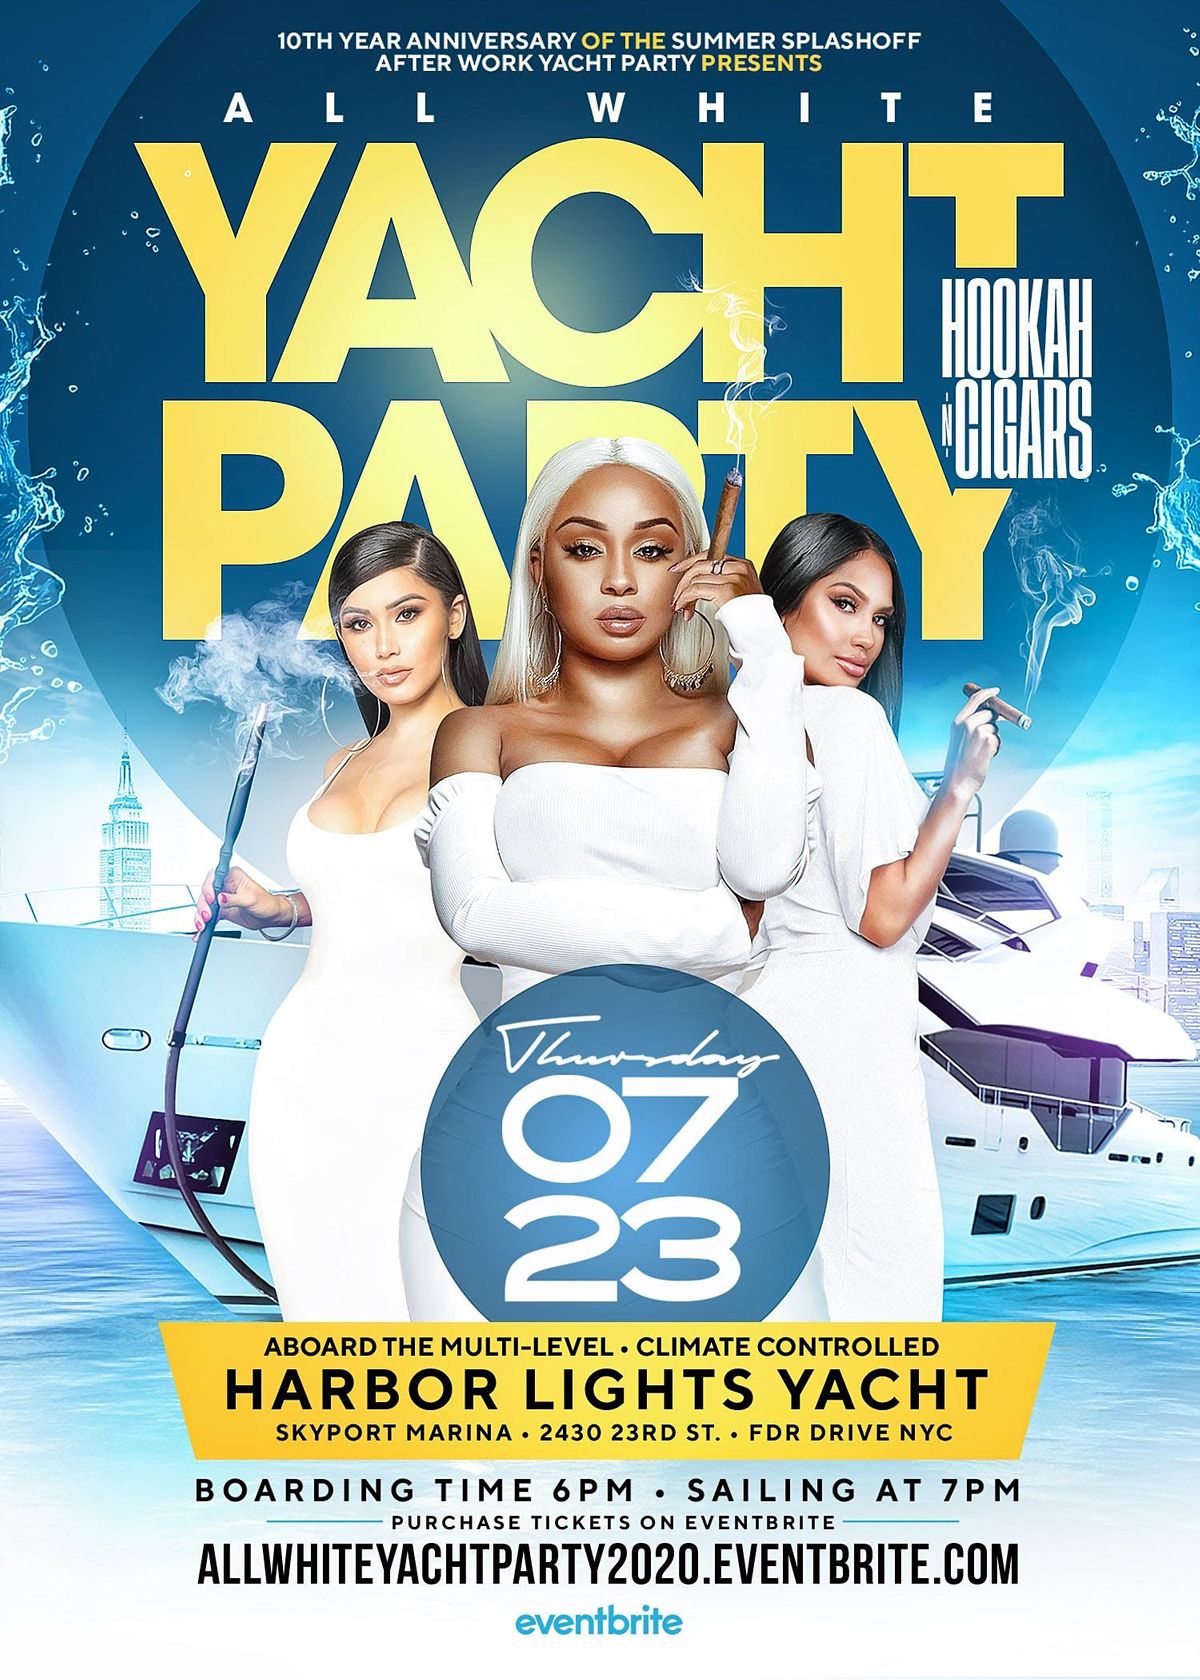 all white yacht party nyc